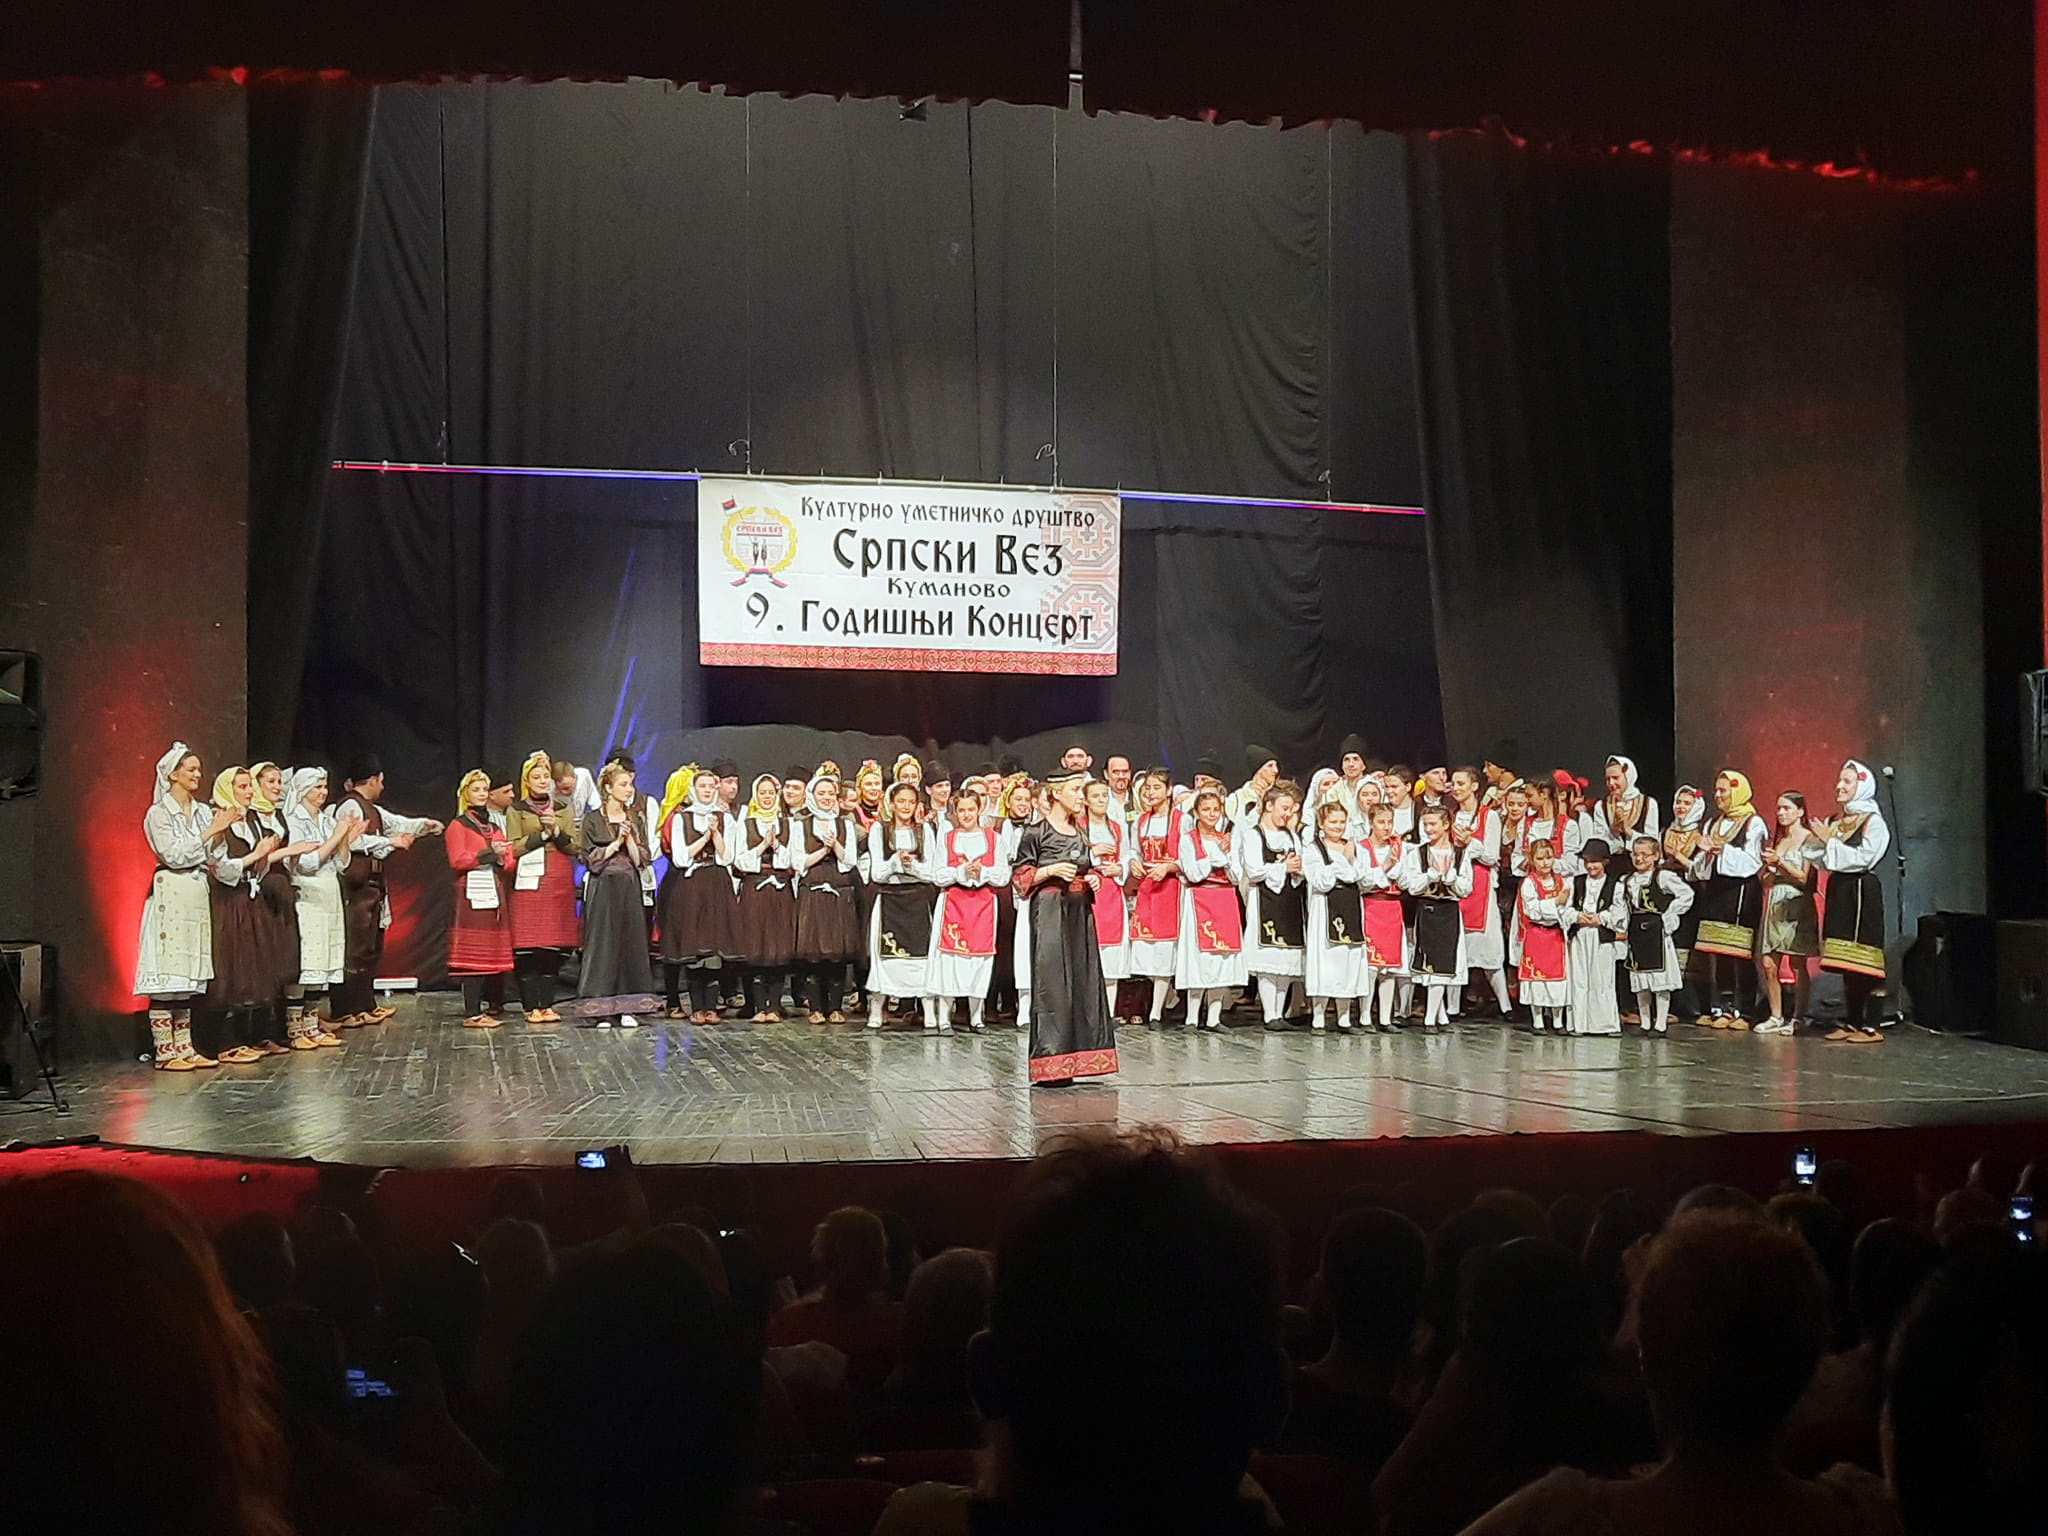 The 9th all-night annual concert of the Ensemble Srpski Vez from Kumanovo